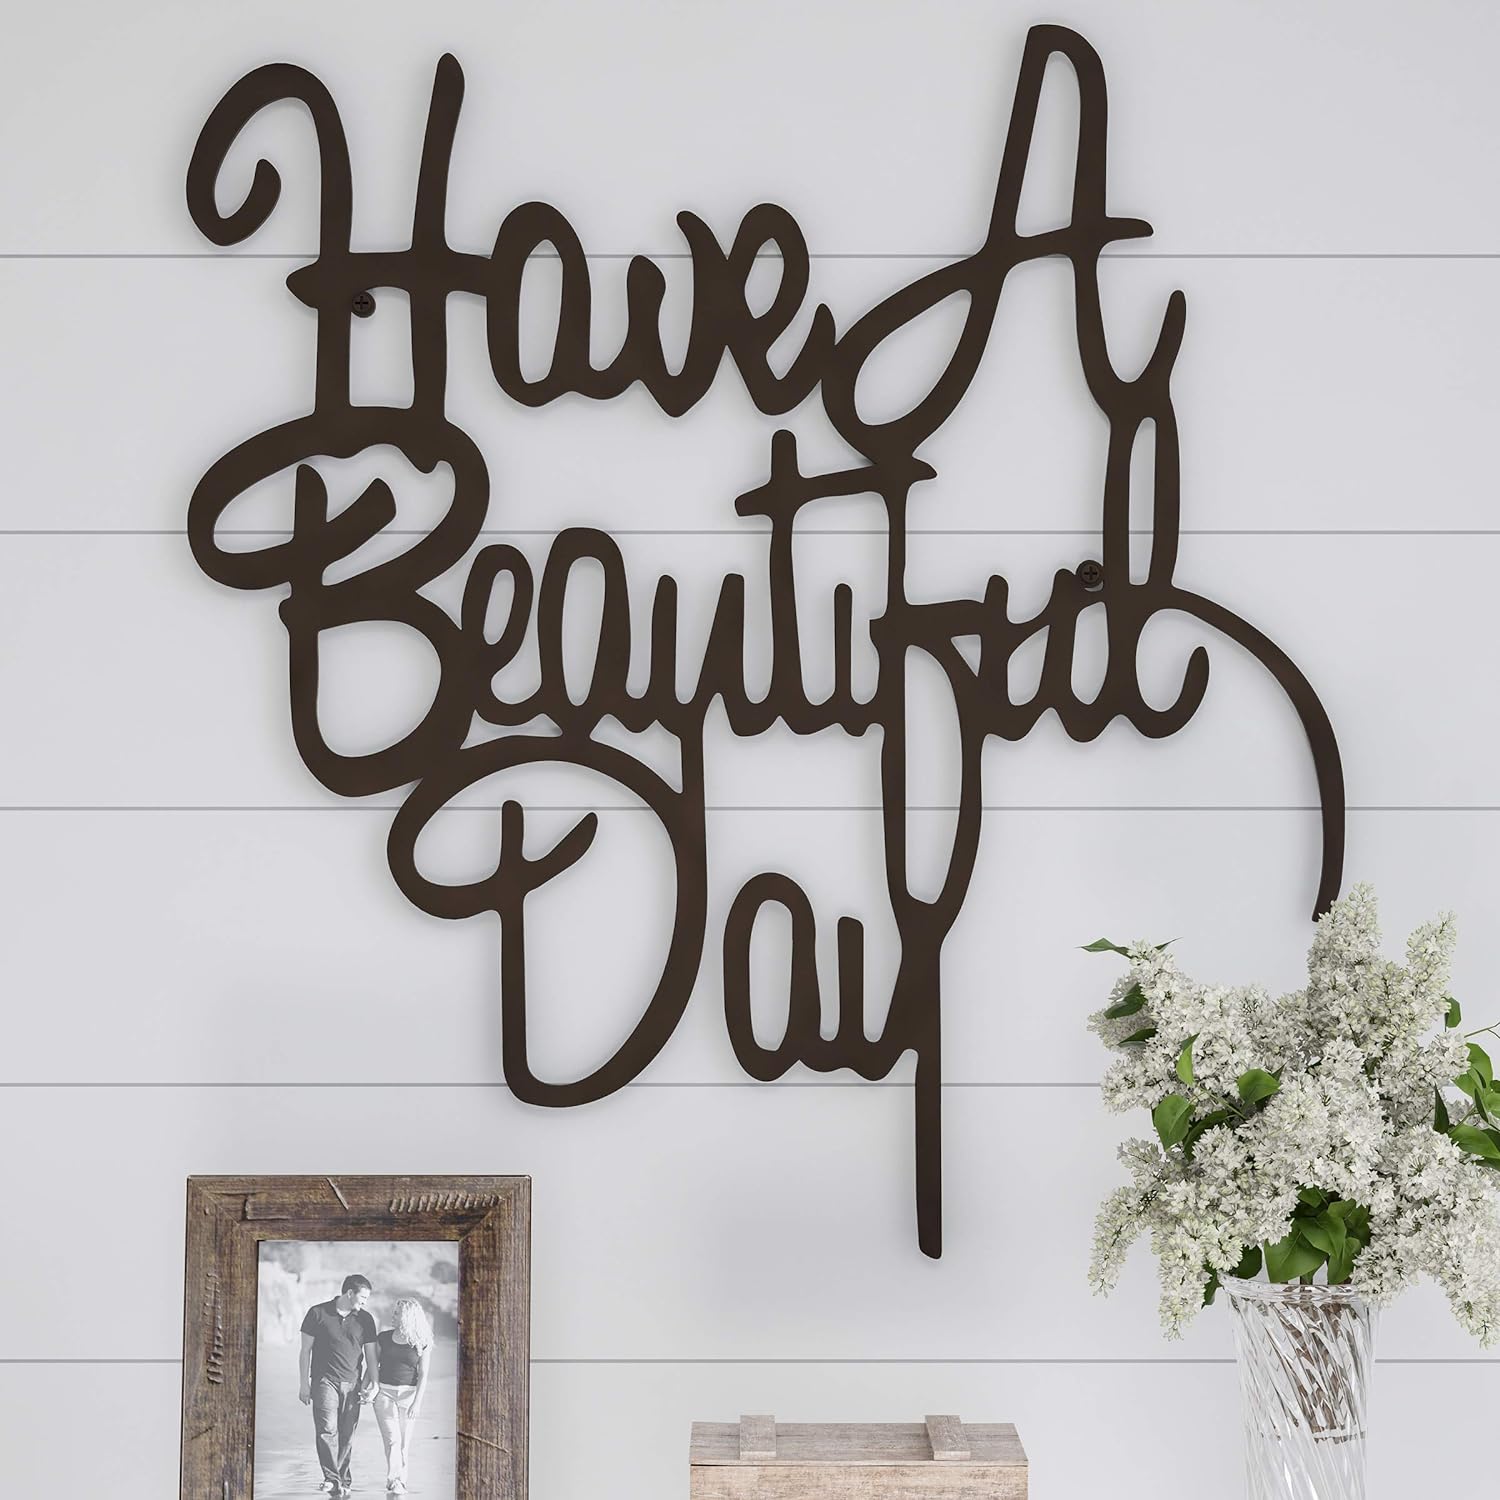 Lavish Home Metal Cutout-Have a Beautiful Day Wall Sign-3D Word Art Home Accent Decor-Perfect Modern Rustic or Vintage Farmhouse Style, 21-Inch Long, Dark Brown